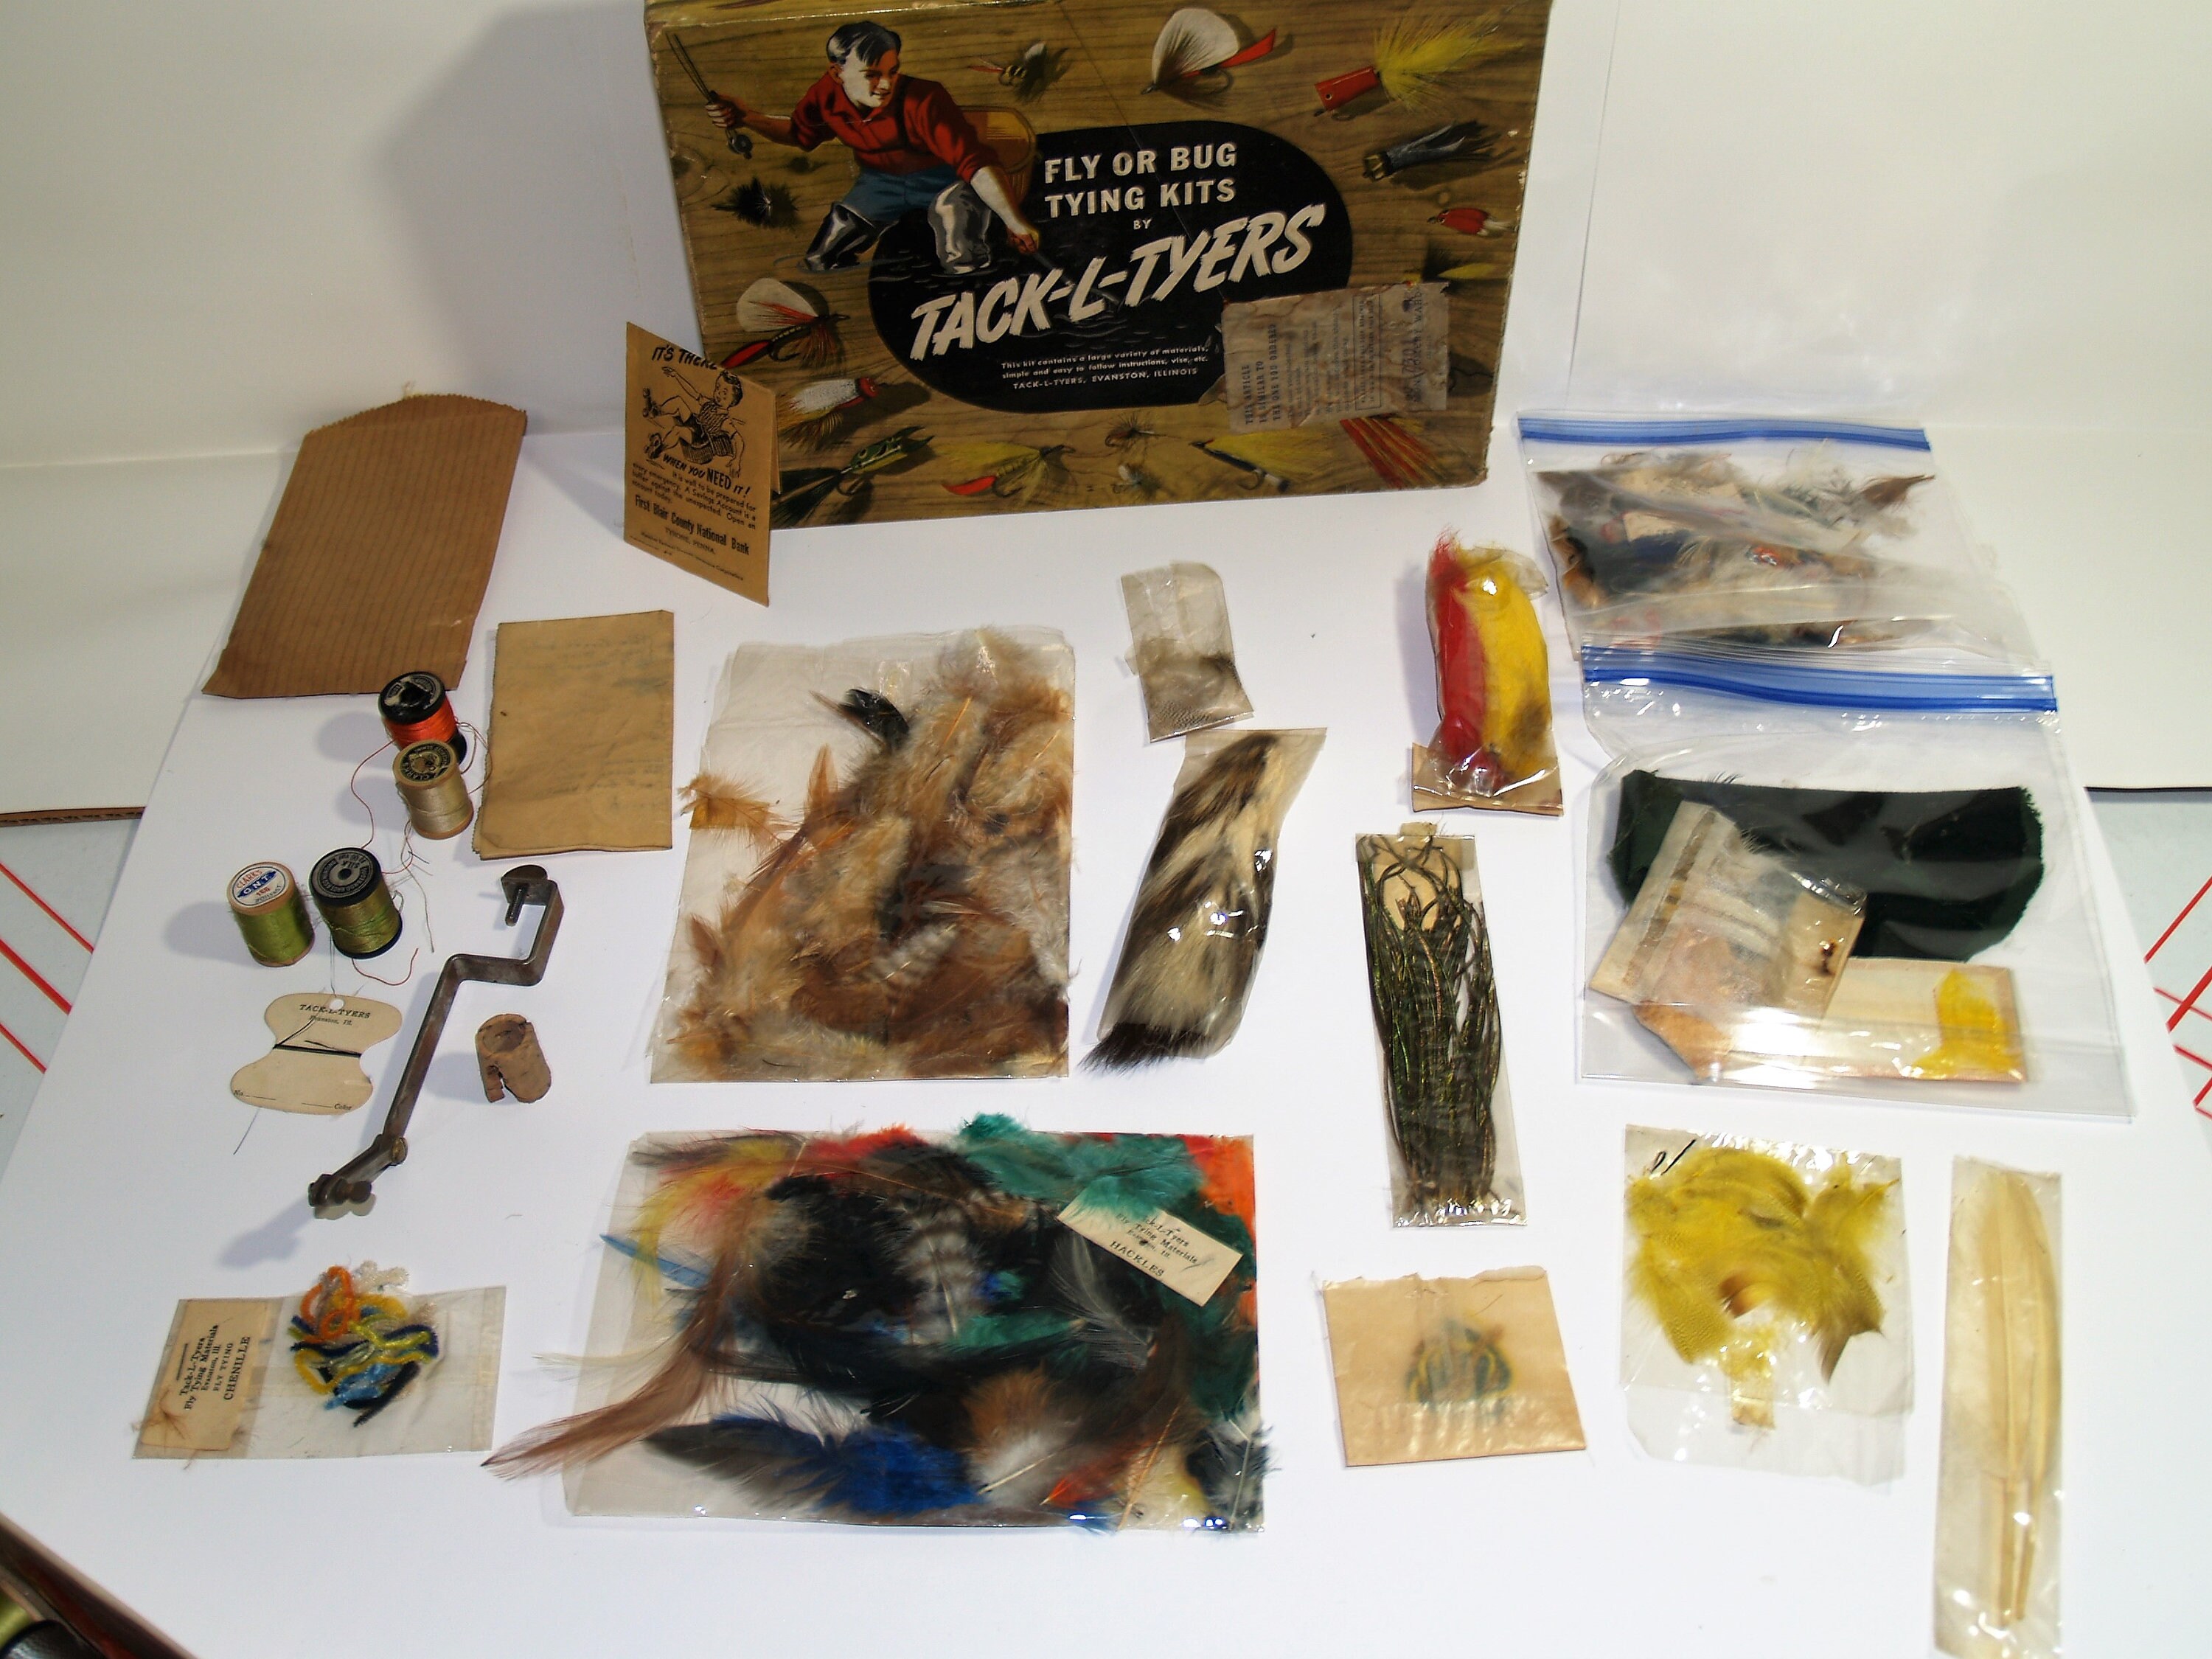 VINTAGE TACK-L TYERS fly or bug tying kit 1930's thru 1940's $14.99 -  PicClick